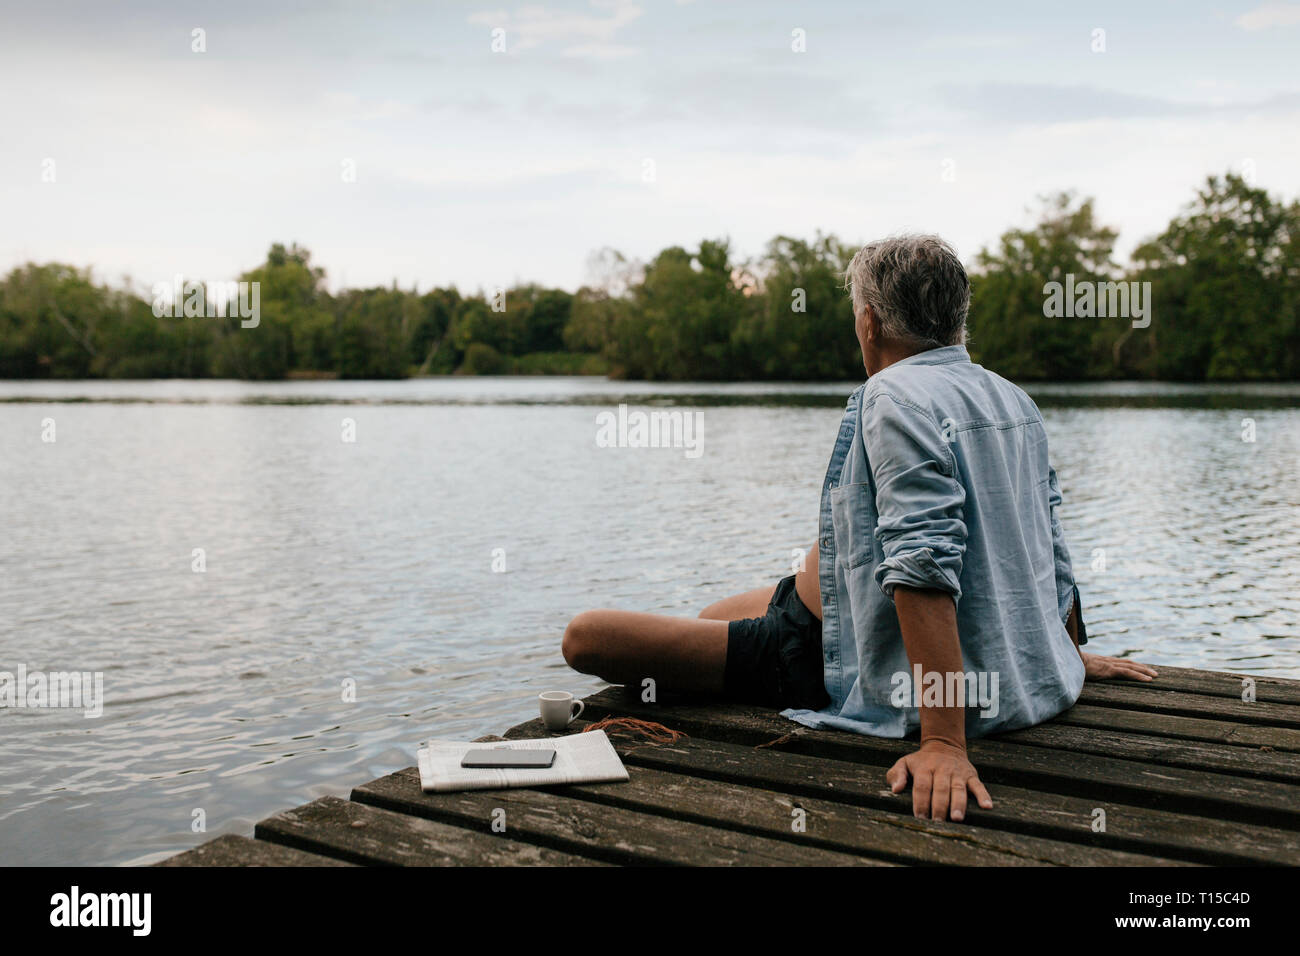 Senior man sitting on jetty at a lake Banque D'Images